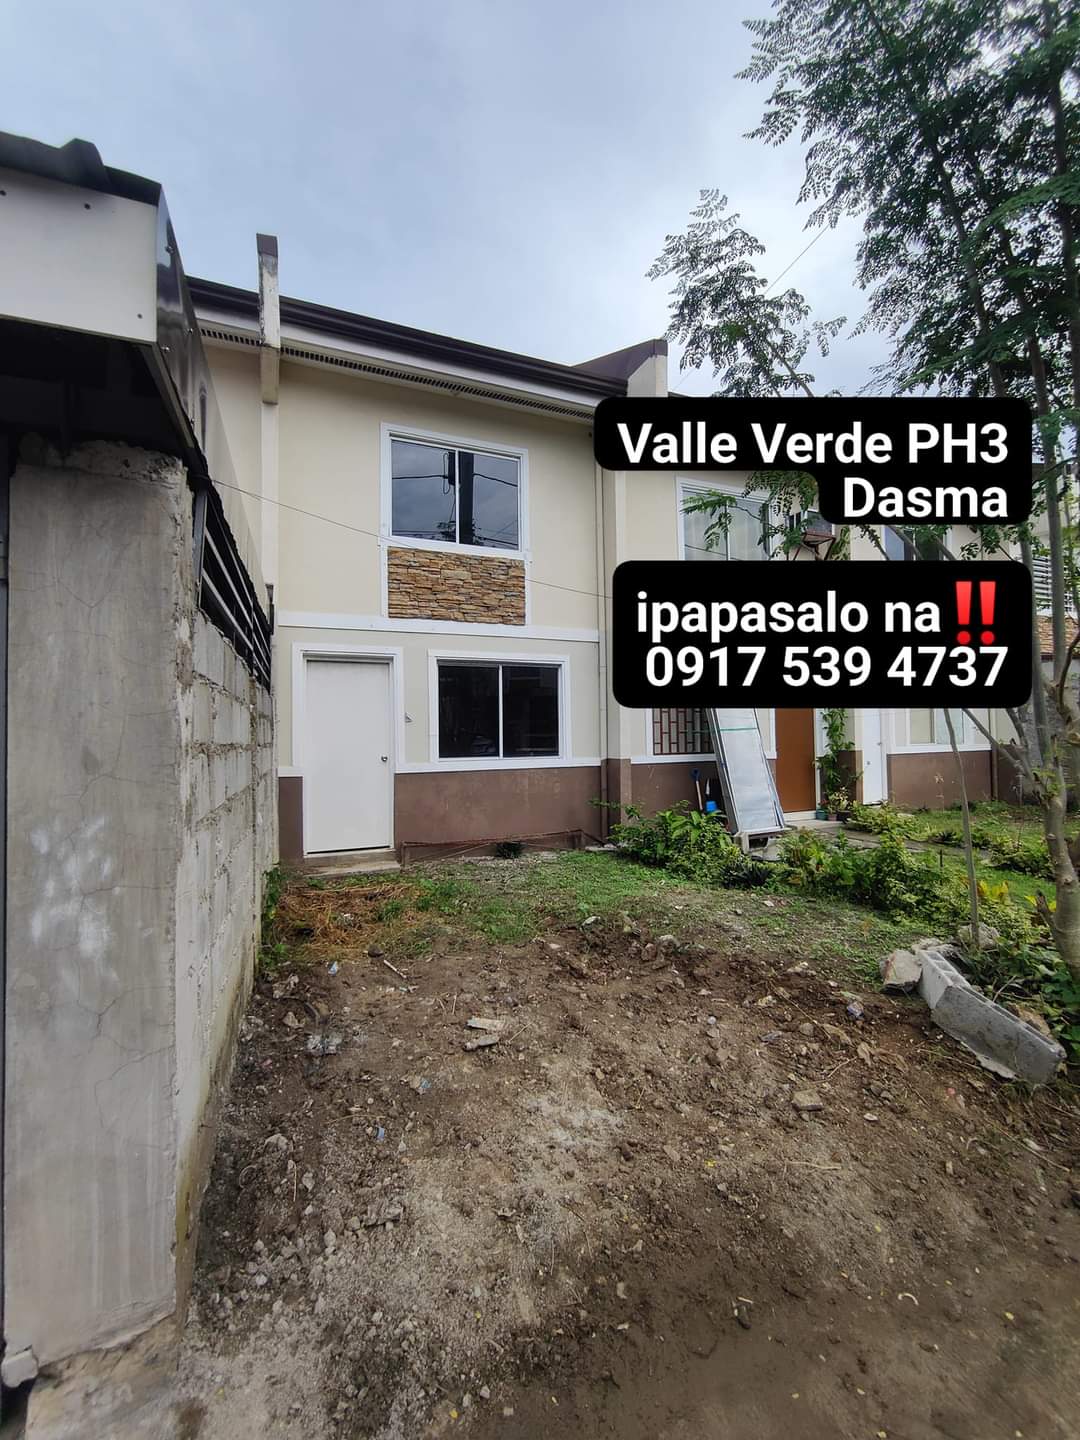 valle verde pasalo rush, affordable townhouse for sale in cavite, 300k cashout pasalo, low monthly 9k townhouse, lipat agad bahay near dasma, near la salle dasma